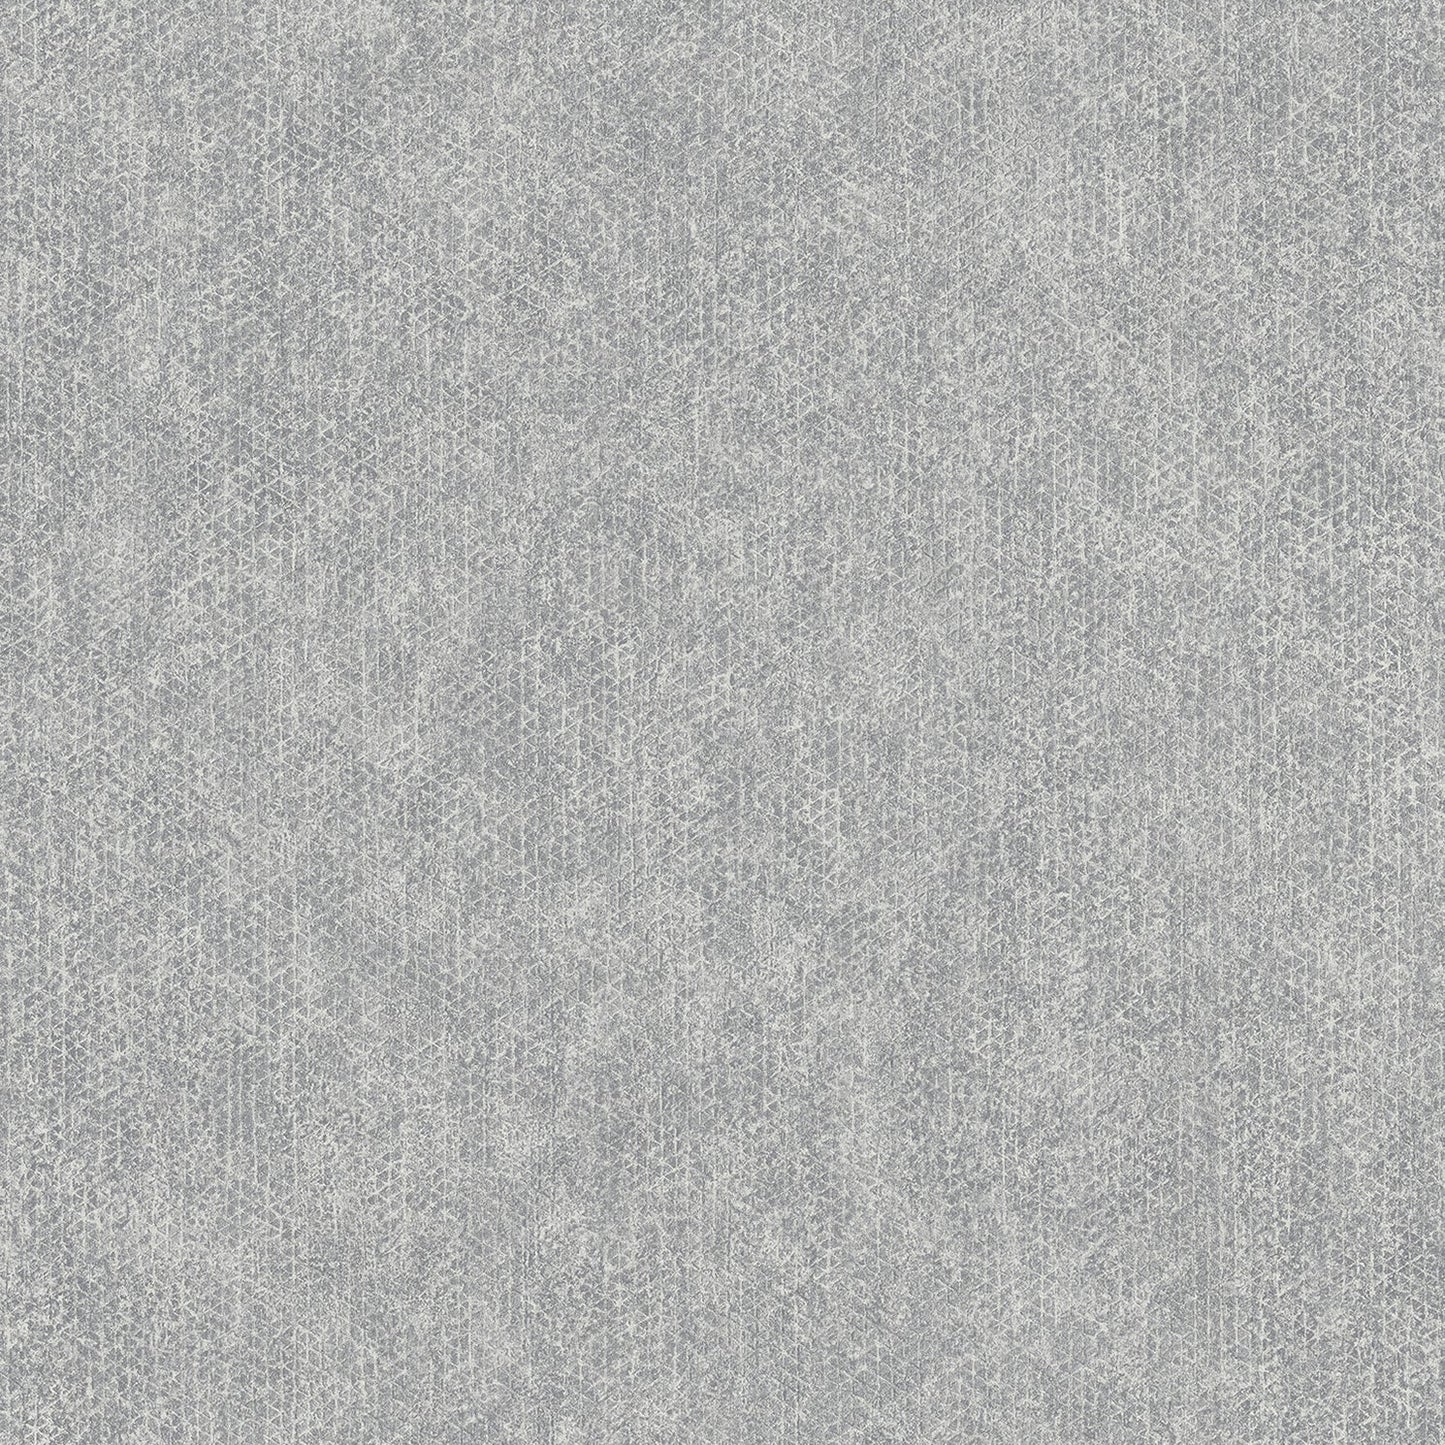 Acquire 4020-75339 Geo & Textures Everett Silver Distressed Textural Silver by Advantage